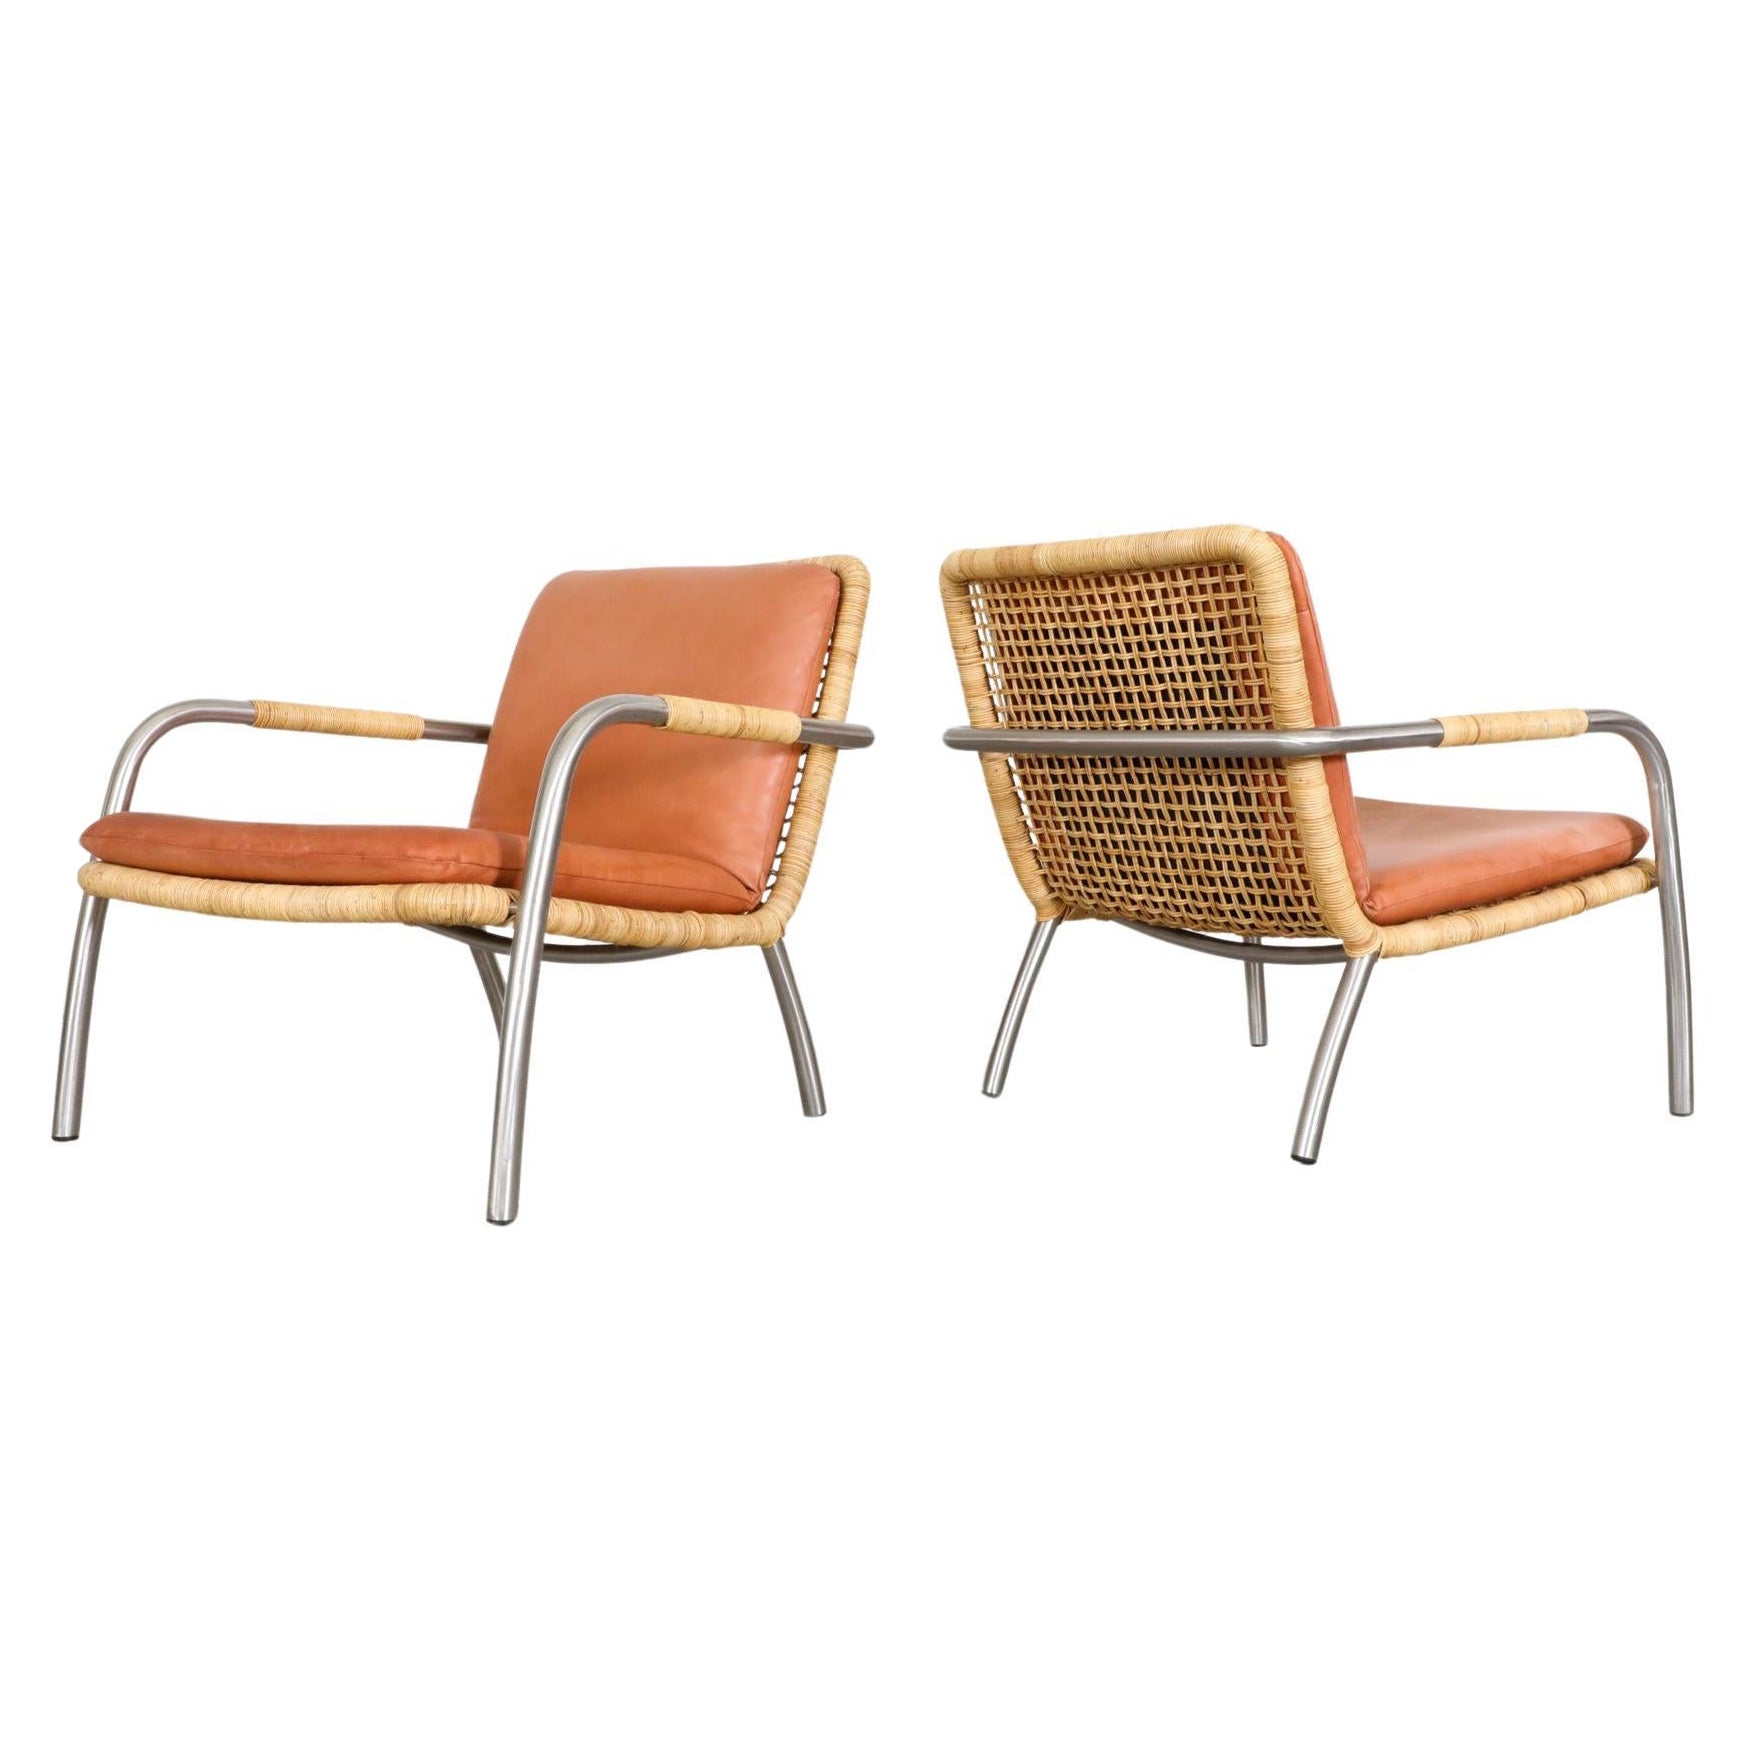 Pair of Martin Visser Style Chrome, Rattan and Terracotta Leather Lounge Chairs For Sale